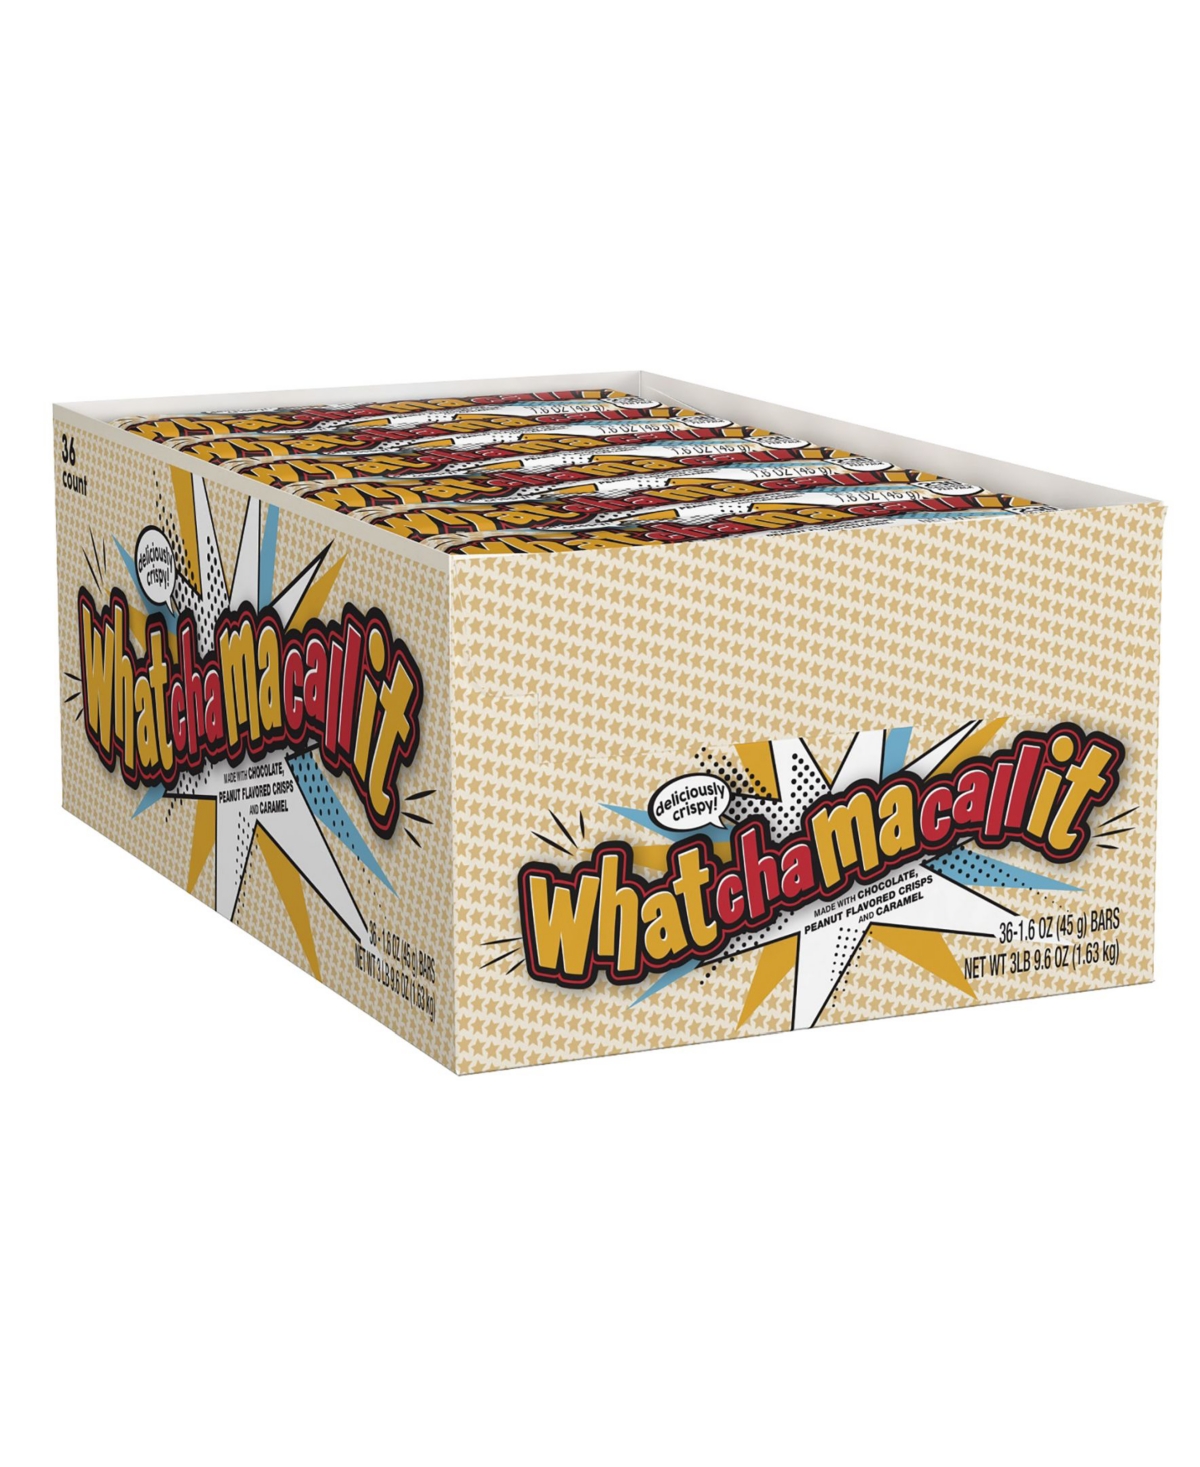 UPC 034000247004 product image for Whatchamacallit Candy Bar, 1.6 oz, 36 Count | upcitemdb.com